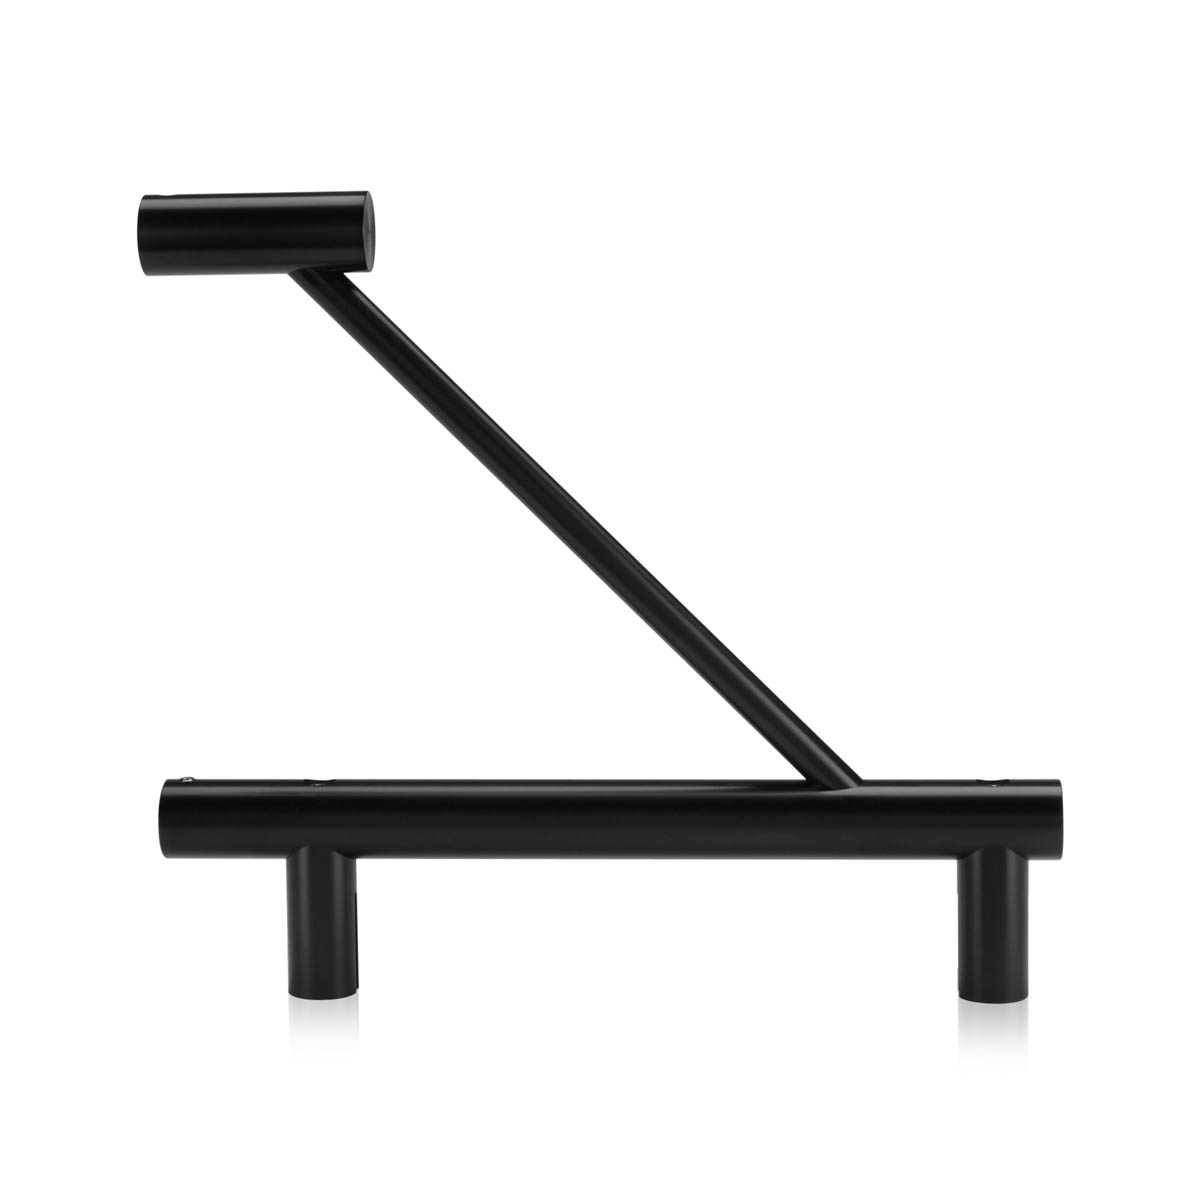 Aluminum Flag Sign Bracket Only, Matte Black Anodized Finish. 1/4'' Thickness Material Accepted, 7-7/8 Length, 3/4'' Diameter. (Sold Without Panel, Bracket Only)